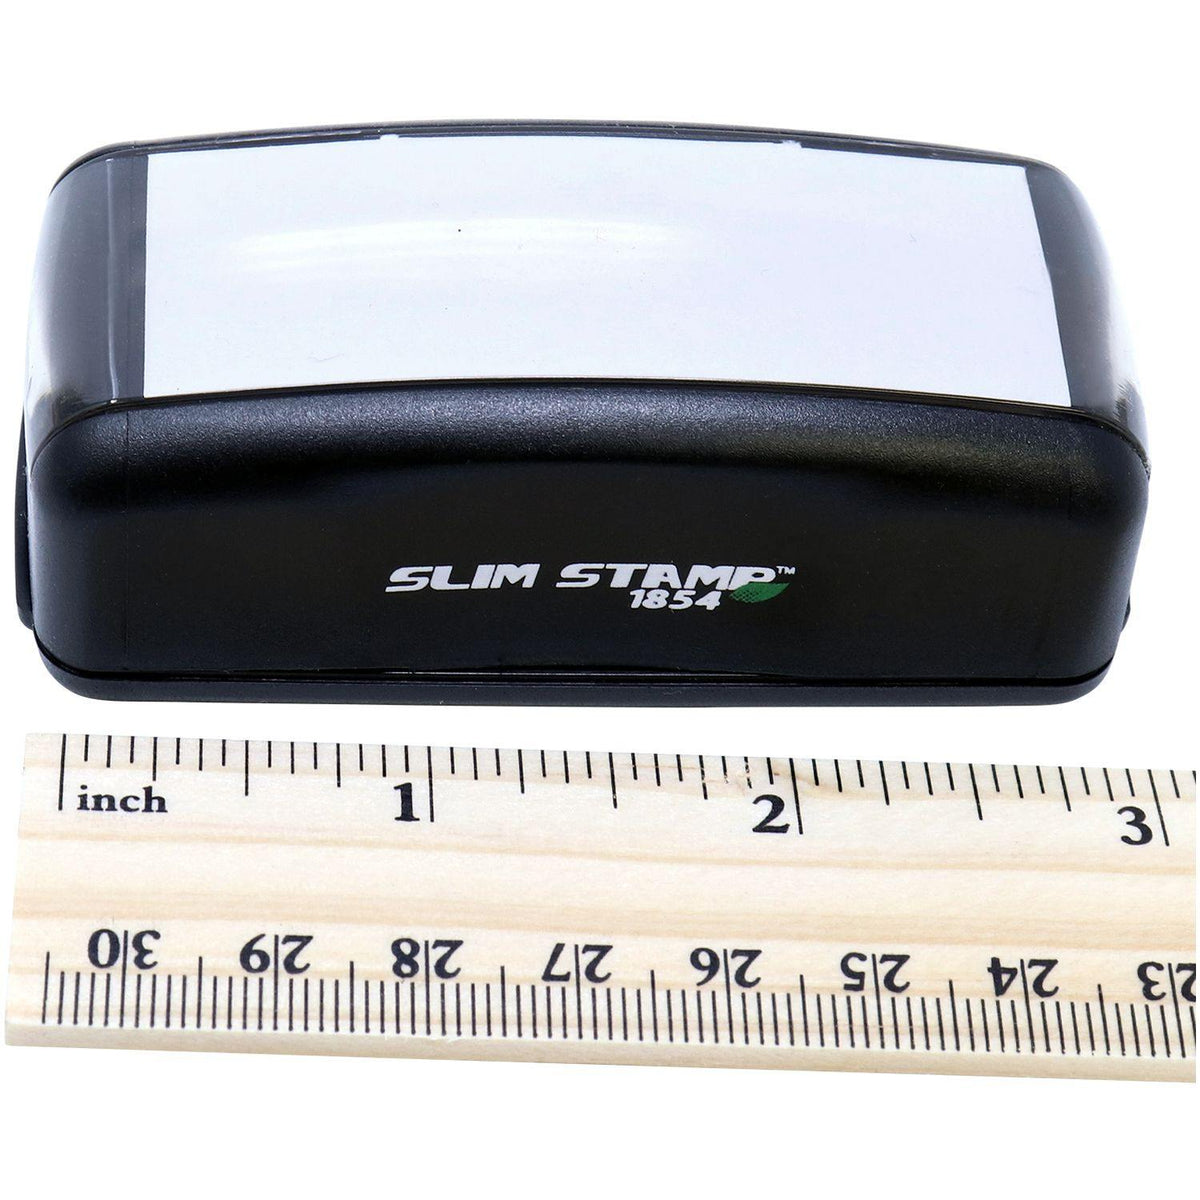 Measurement Large Pre-Inked Bold Font File Stamp with Ruler